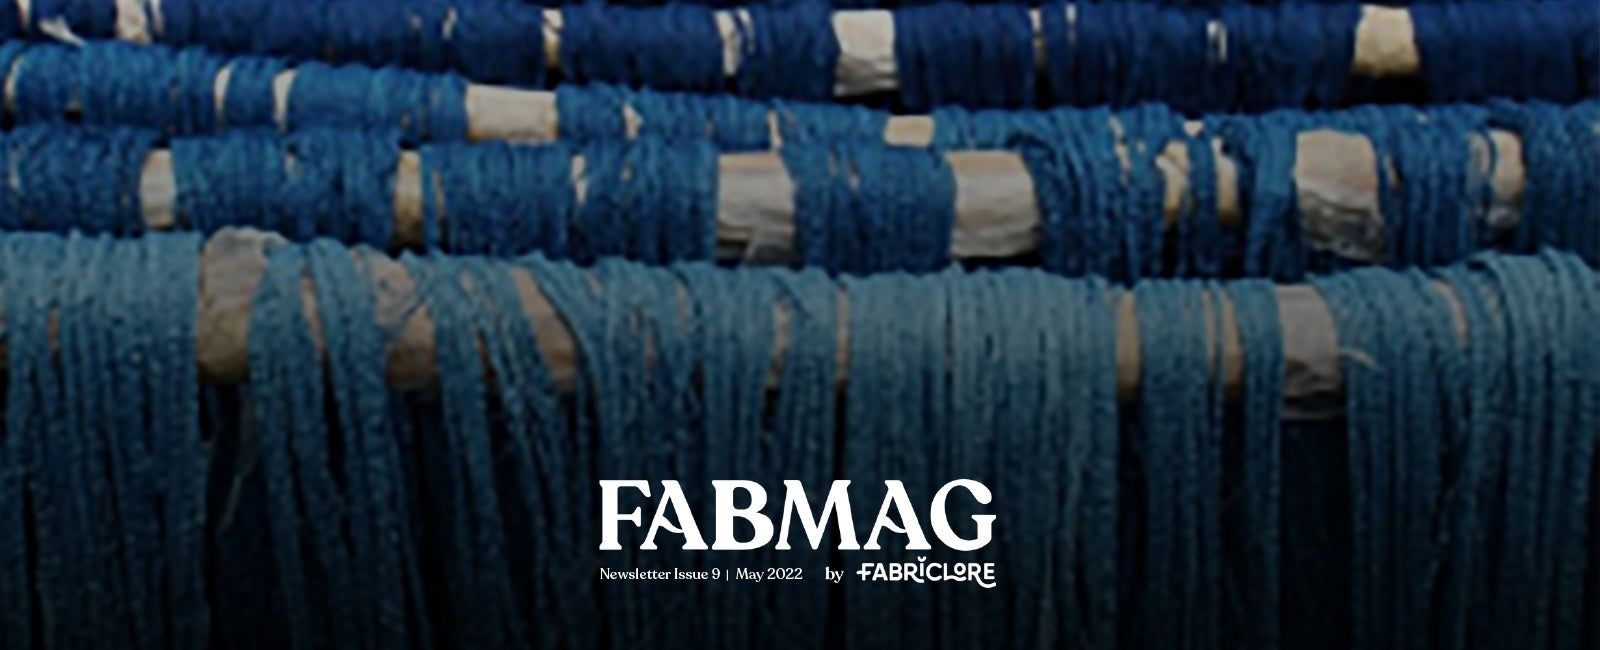 Fabriclore Newsletter - Latest Fashion & Textile News at a Glance #9